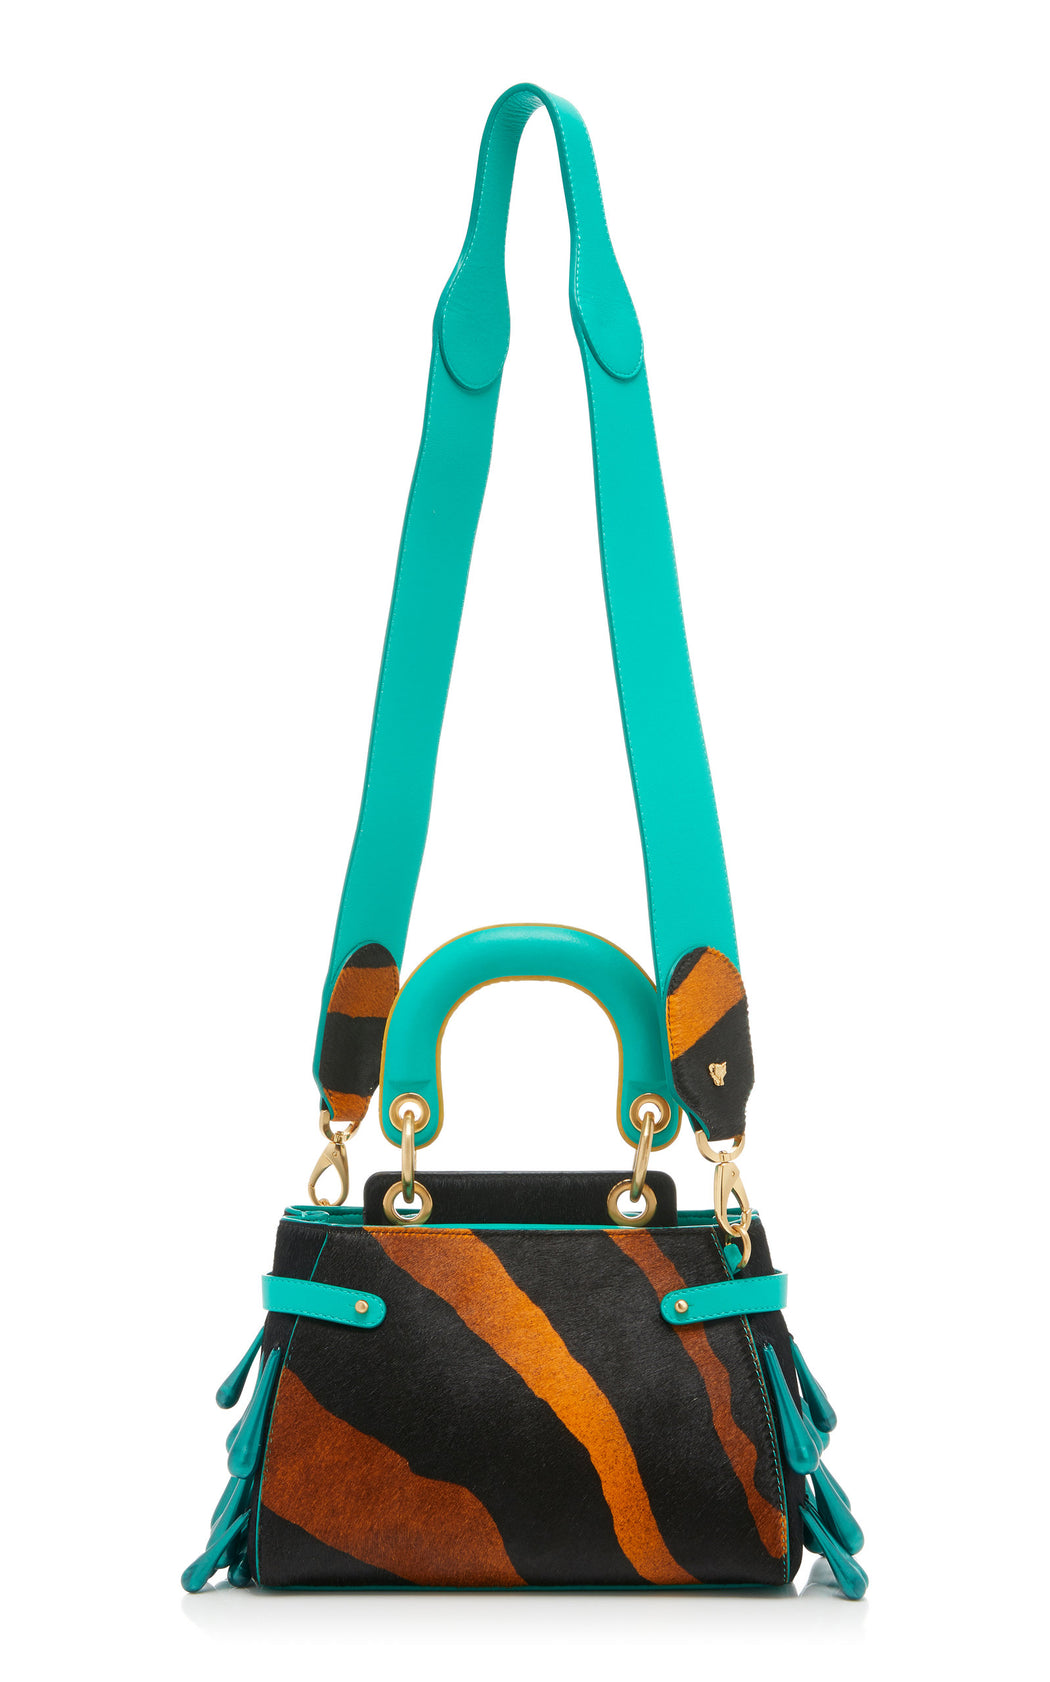 A ladylike luxury frame bag in animal print cavallino with teal nappa leather that fits all the essentials. Comes with a detachable cross-body strap as shown and our special "macaron" top handle. The trapeze bag is embellished with pearlescent resin droplets.